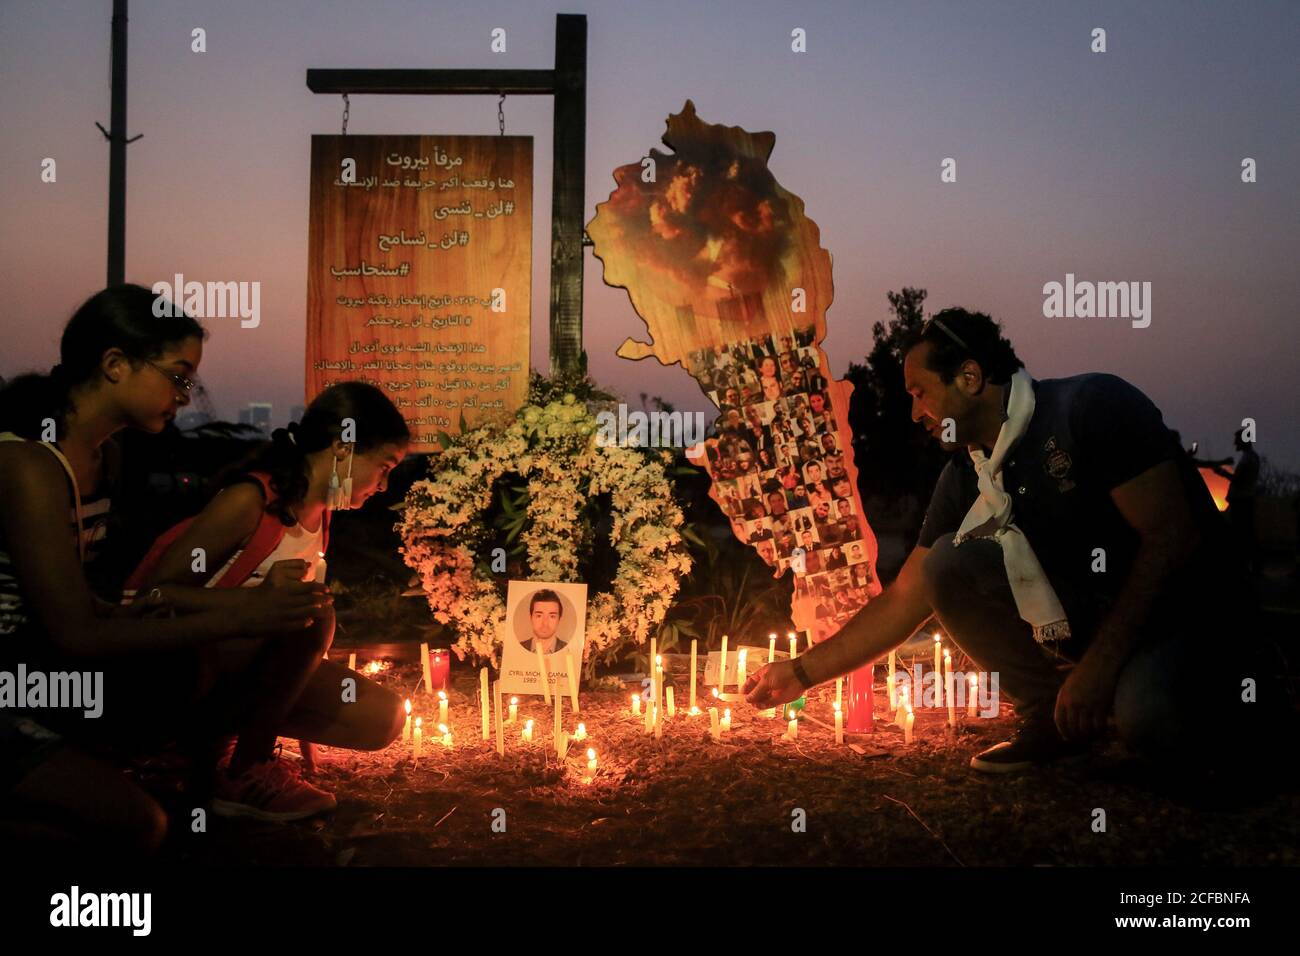 Beirut, Lebanon. 04th Sep, 2020. Relatives of victims of Beirut's massive explosion light candles during a memorial to mark one month since the explosion. Credit: Marwan Naamani/dpa/Alamy Live News Stock Photo